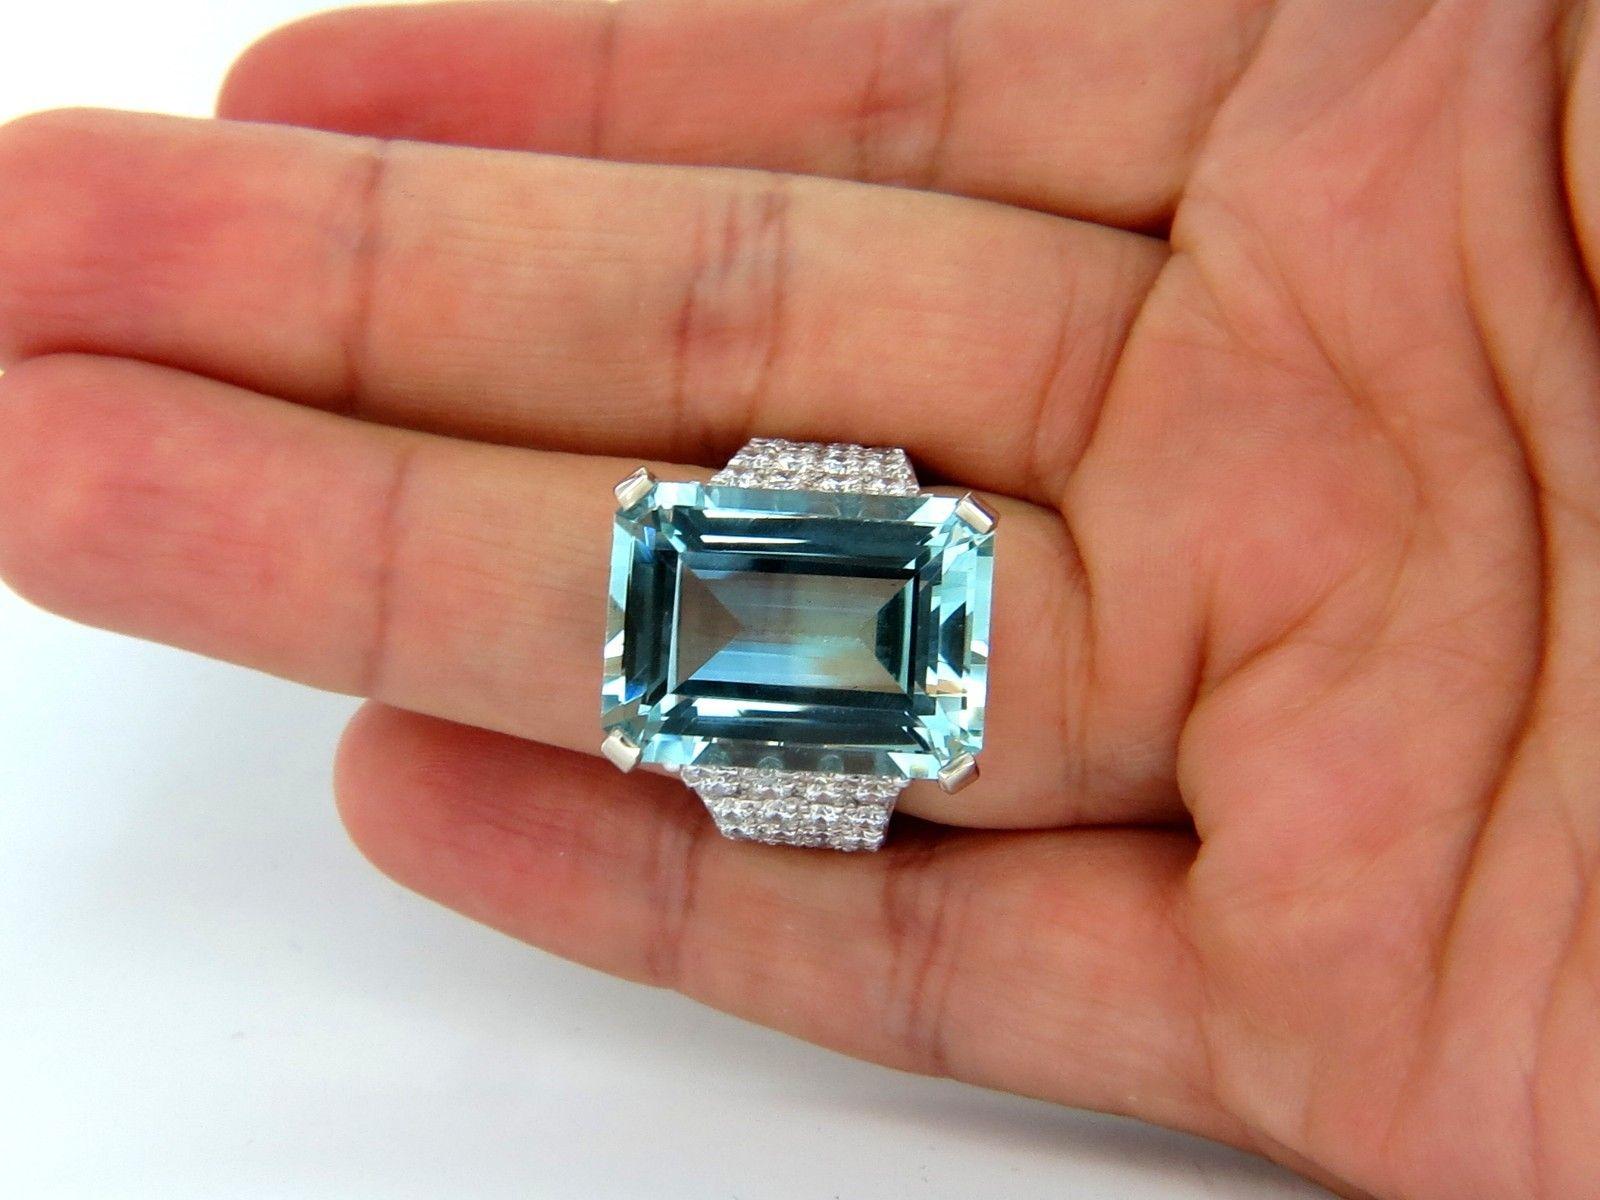 Aquamarine Collections

GIA Certified 25.12ct. Natural Aquamarine Ring

 Excellent clean clarity

 Octagonal Step cut (emerald cut).

Blue Aqua color.

Brilliant sparkles from all angles

Pristine Transparency

Report: 2175093316

22.17 x 16.25 x